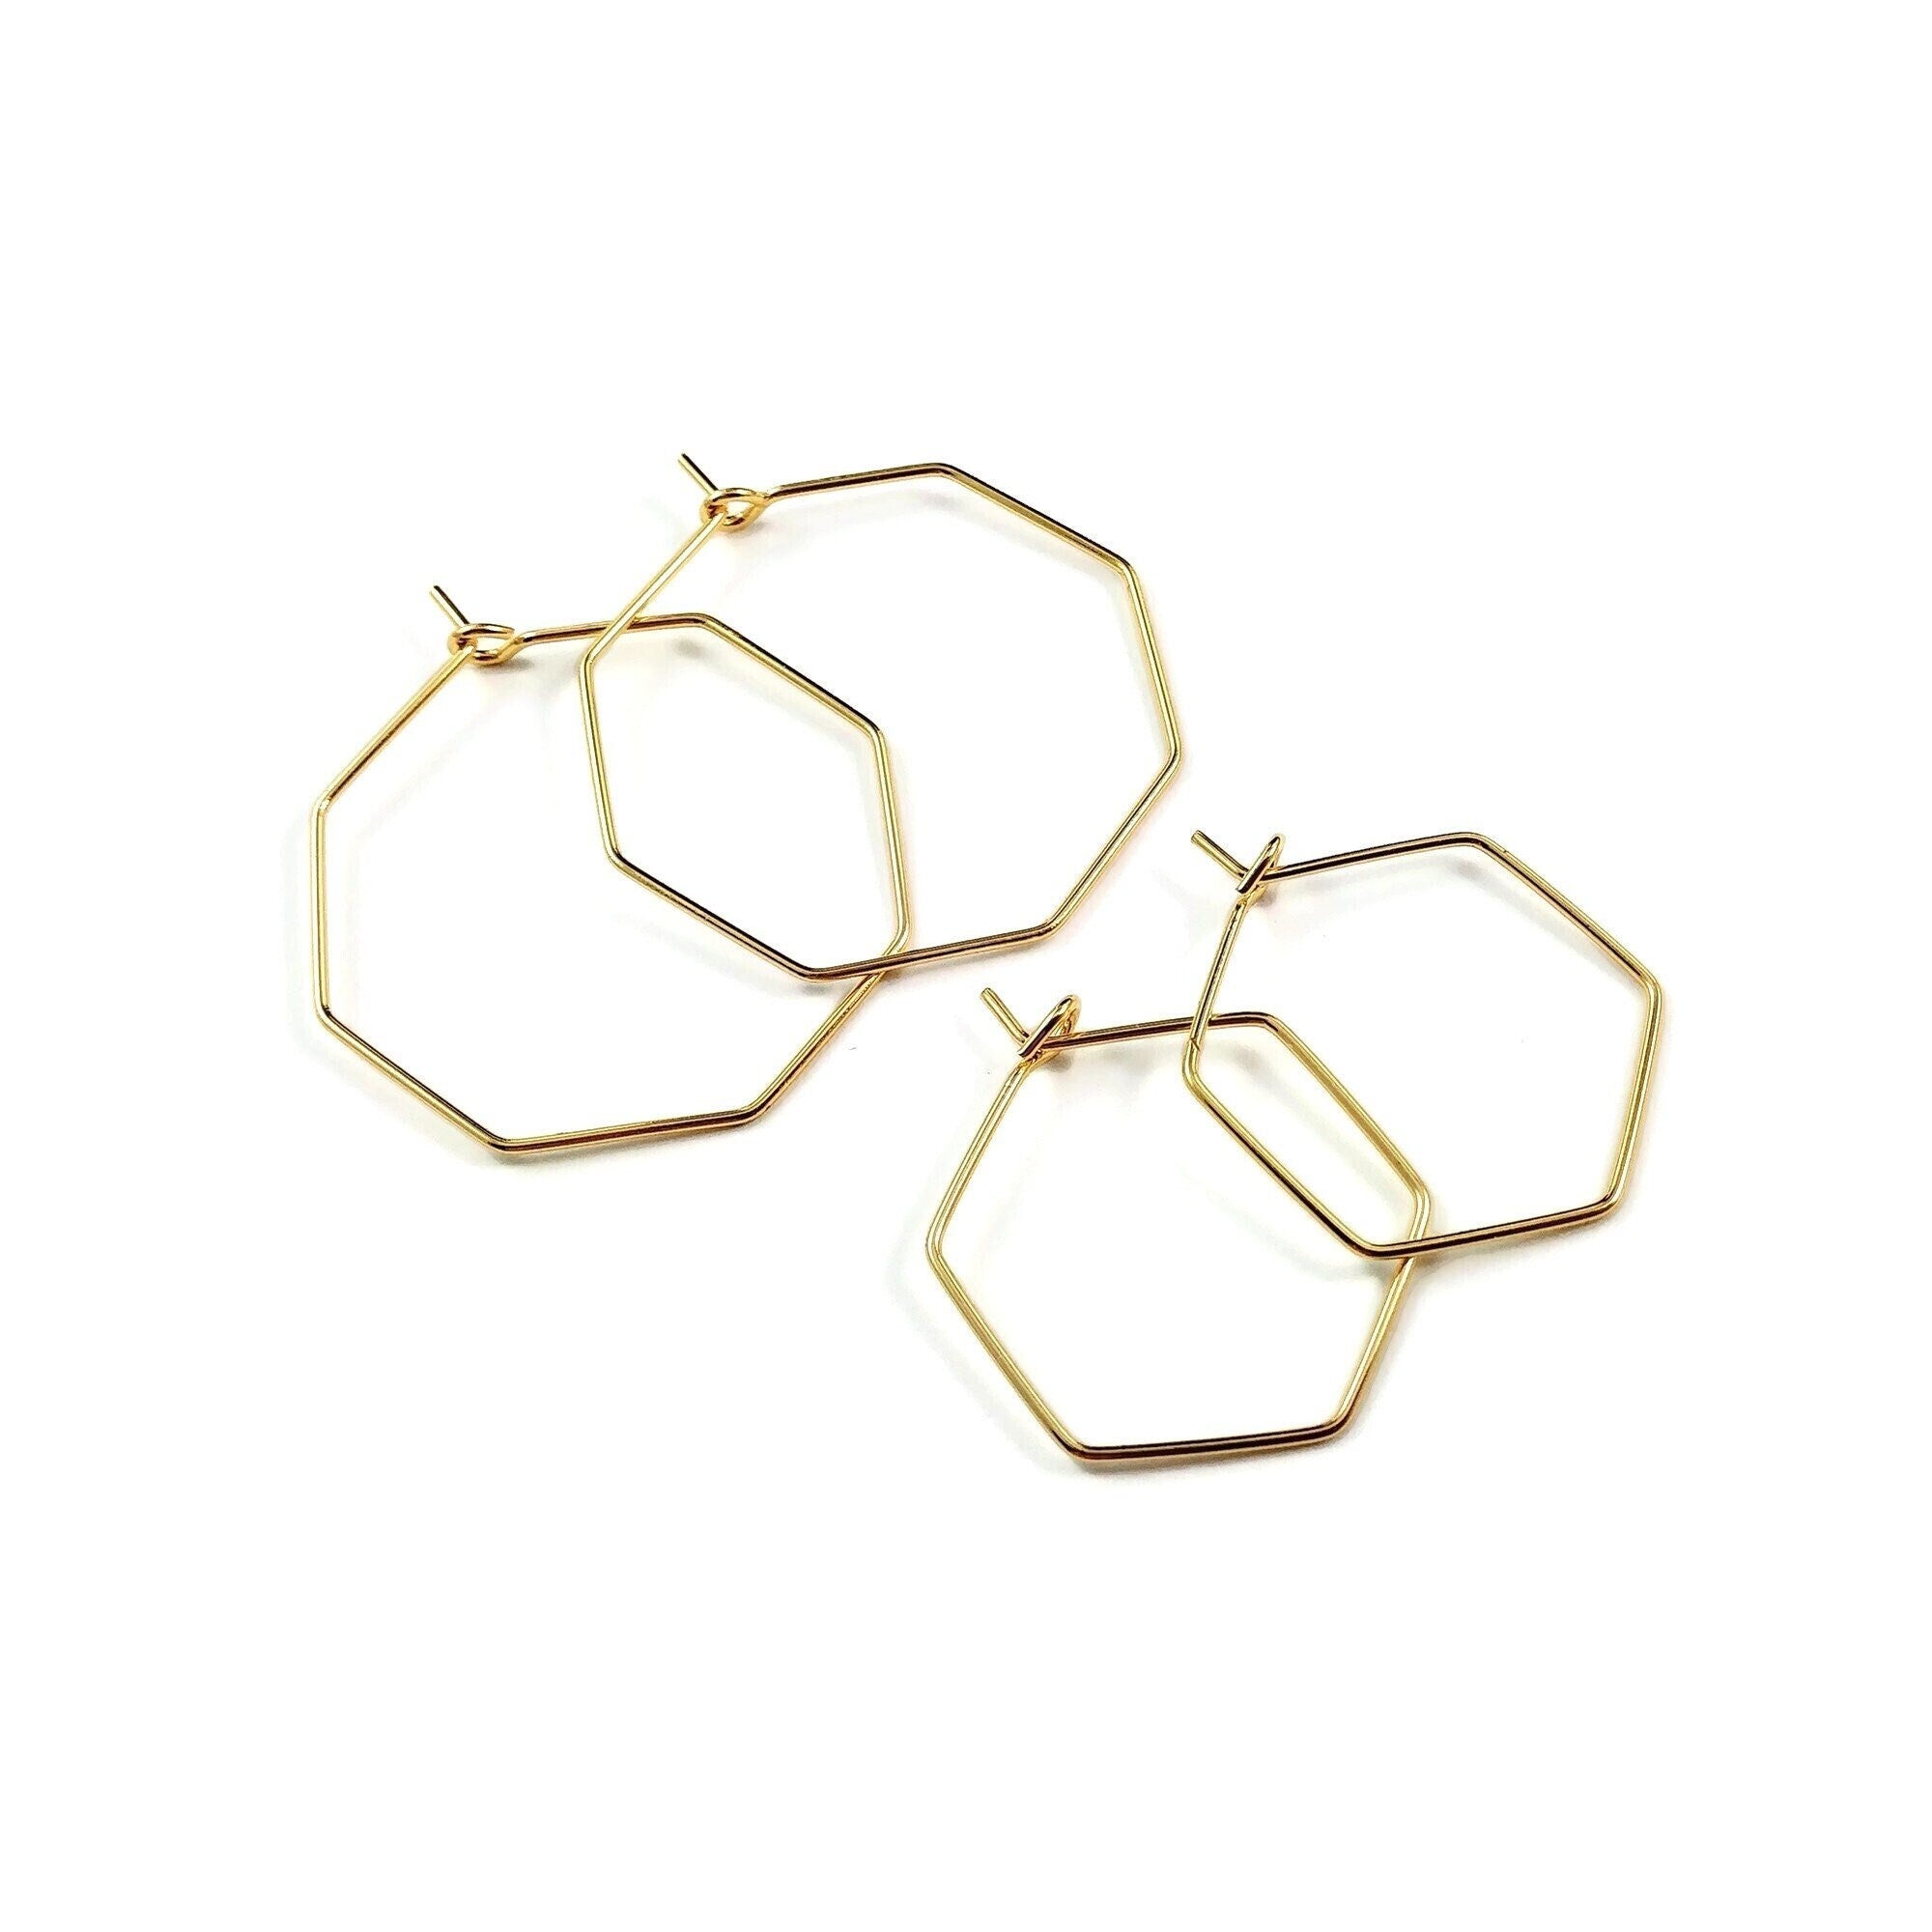 18K Gold plated hexagon hoops 2pcs (1 pair) - 2 size available - Nickel free brass geometric earwire